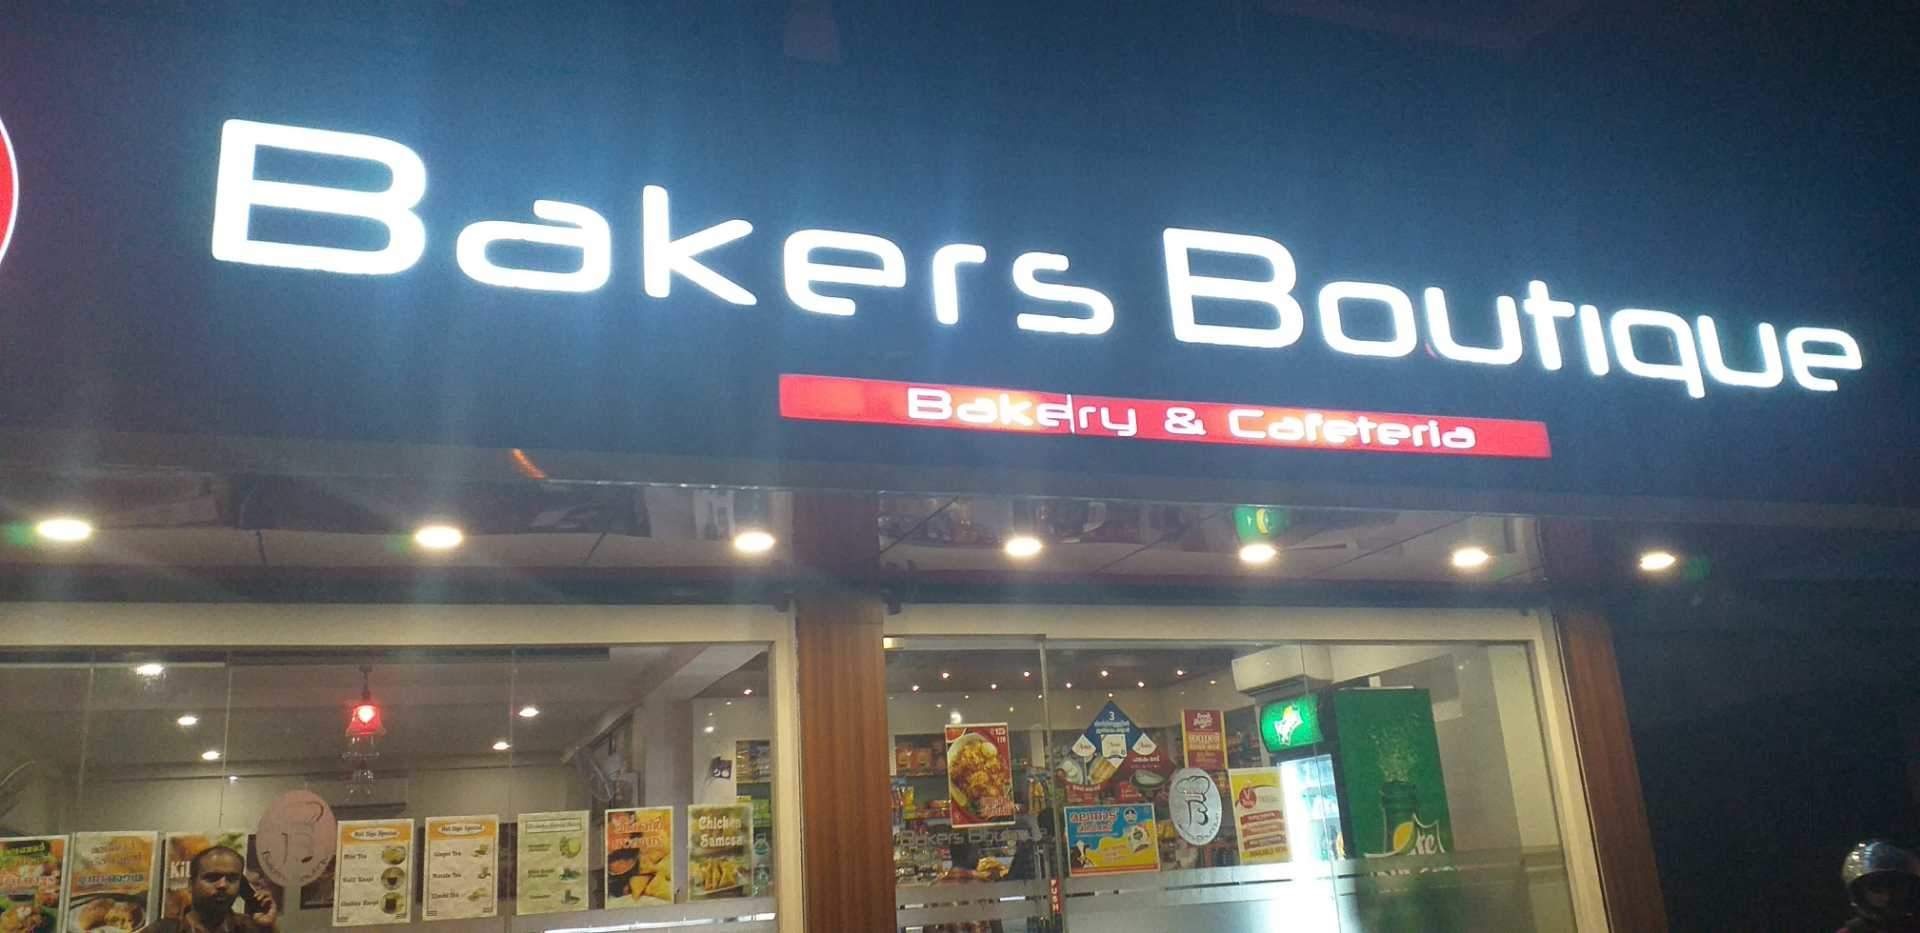 Bakers Boutique, Bakery & Cafeteria,  service in Thiruvalla, Pathanamthitta